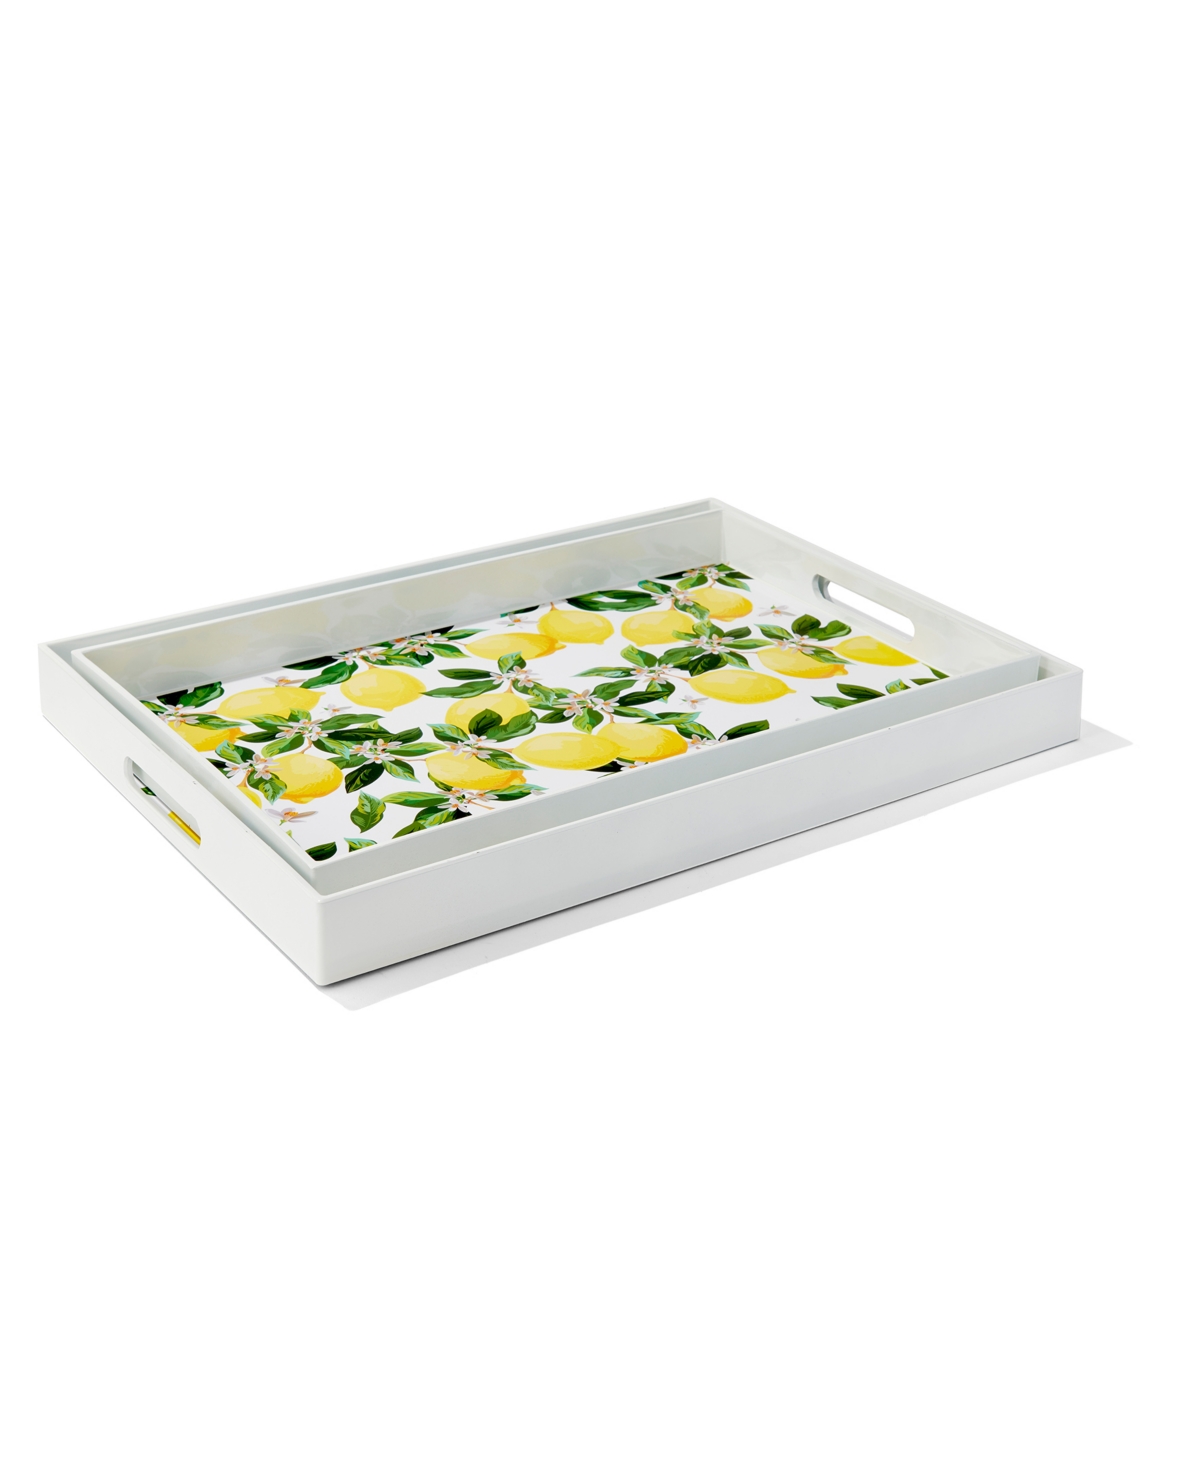 American Atelier Blossoms Lemons Trays Set, 2 Piece In Yellow